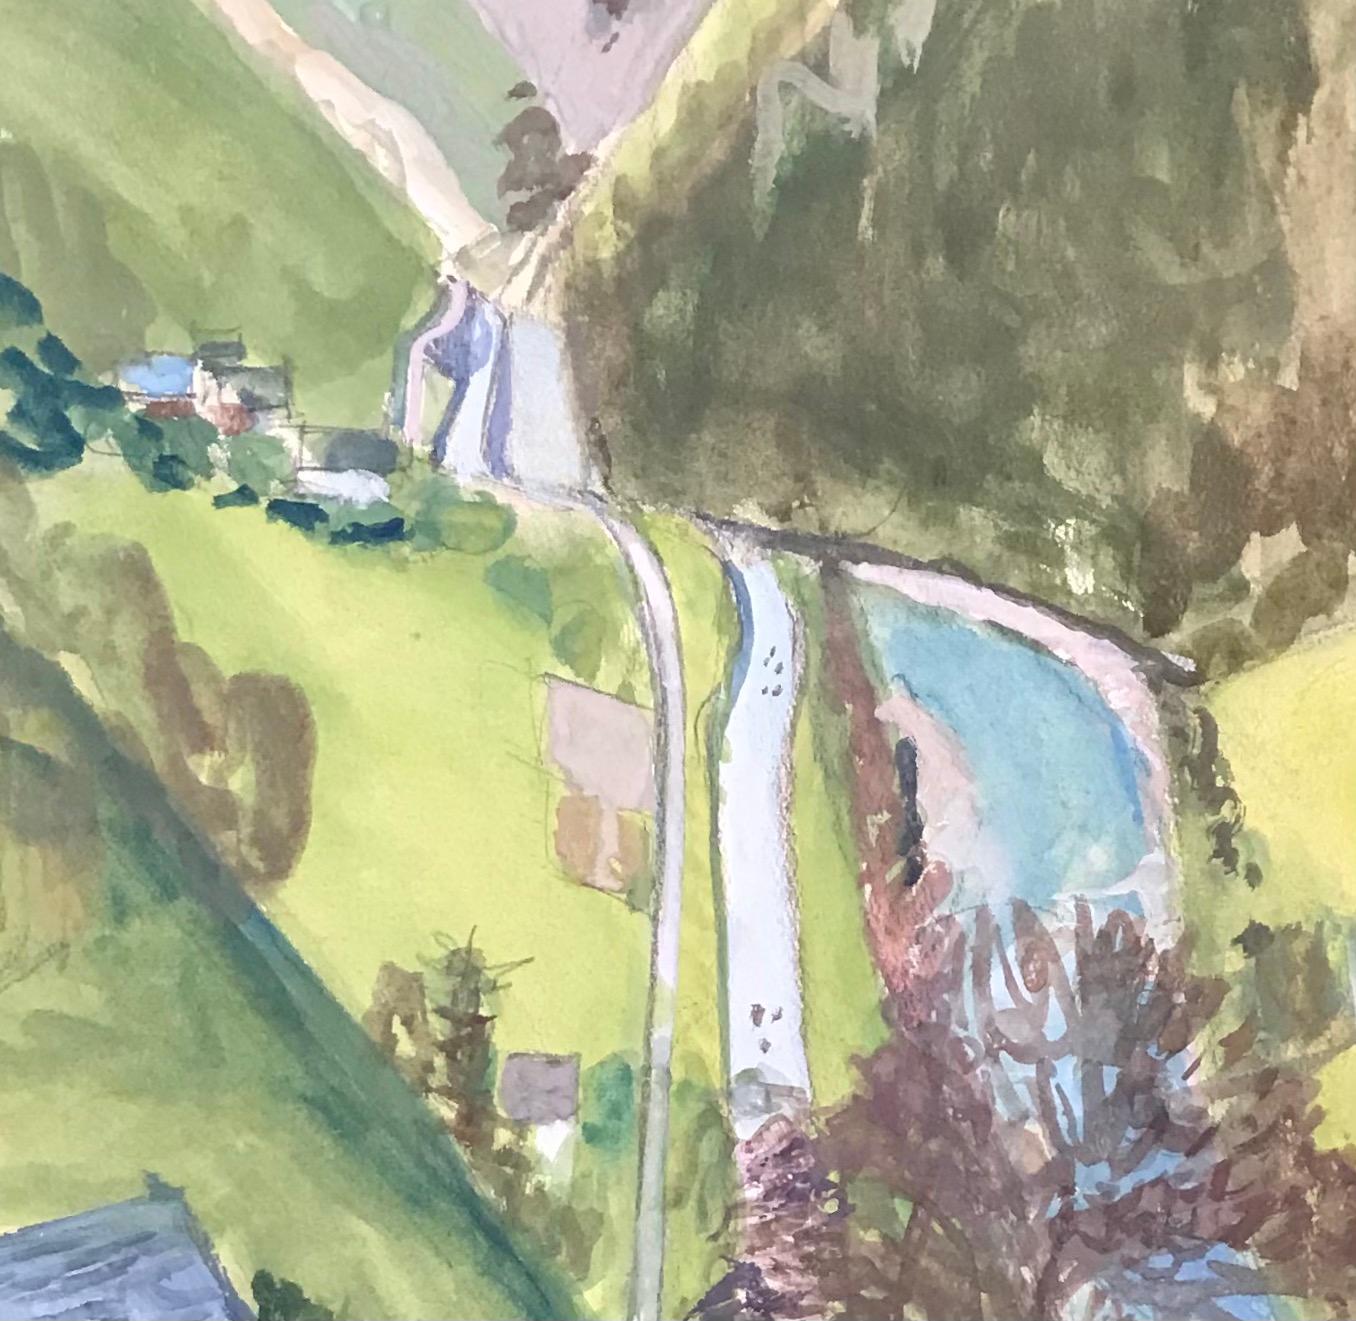 Watercourse by I. Ch. Goetz - Watercolor on paper 36x45 cm - Modern Painting by Isaac Charles Goetz